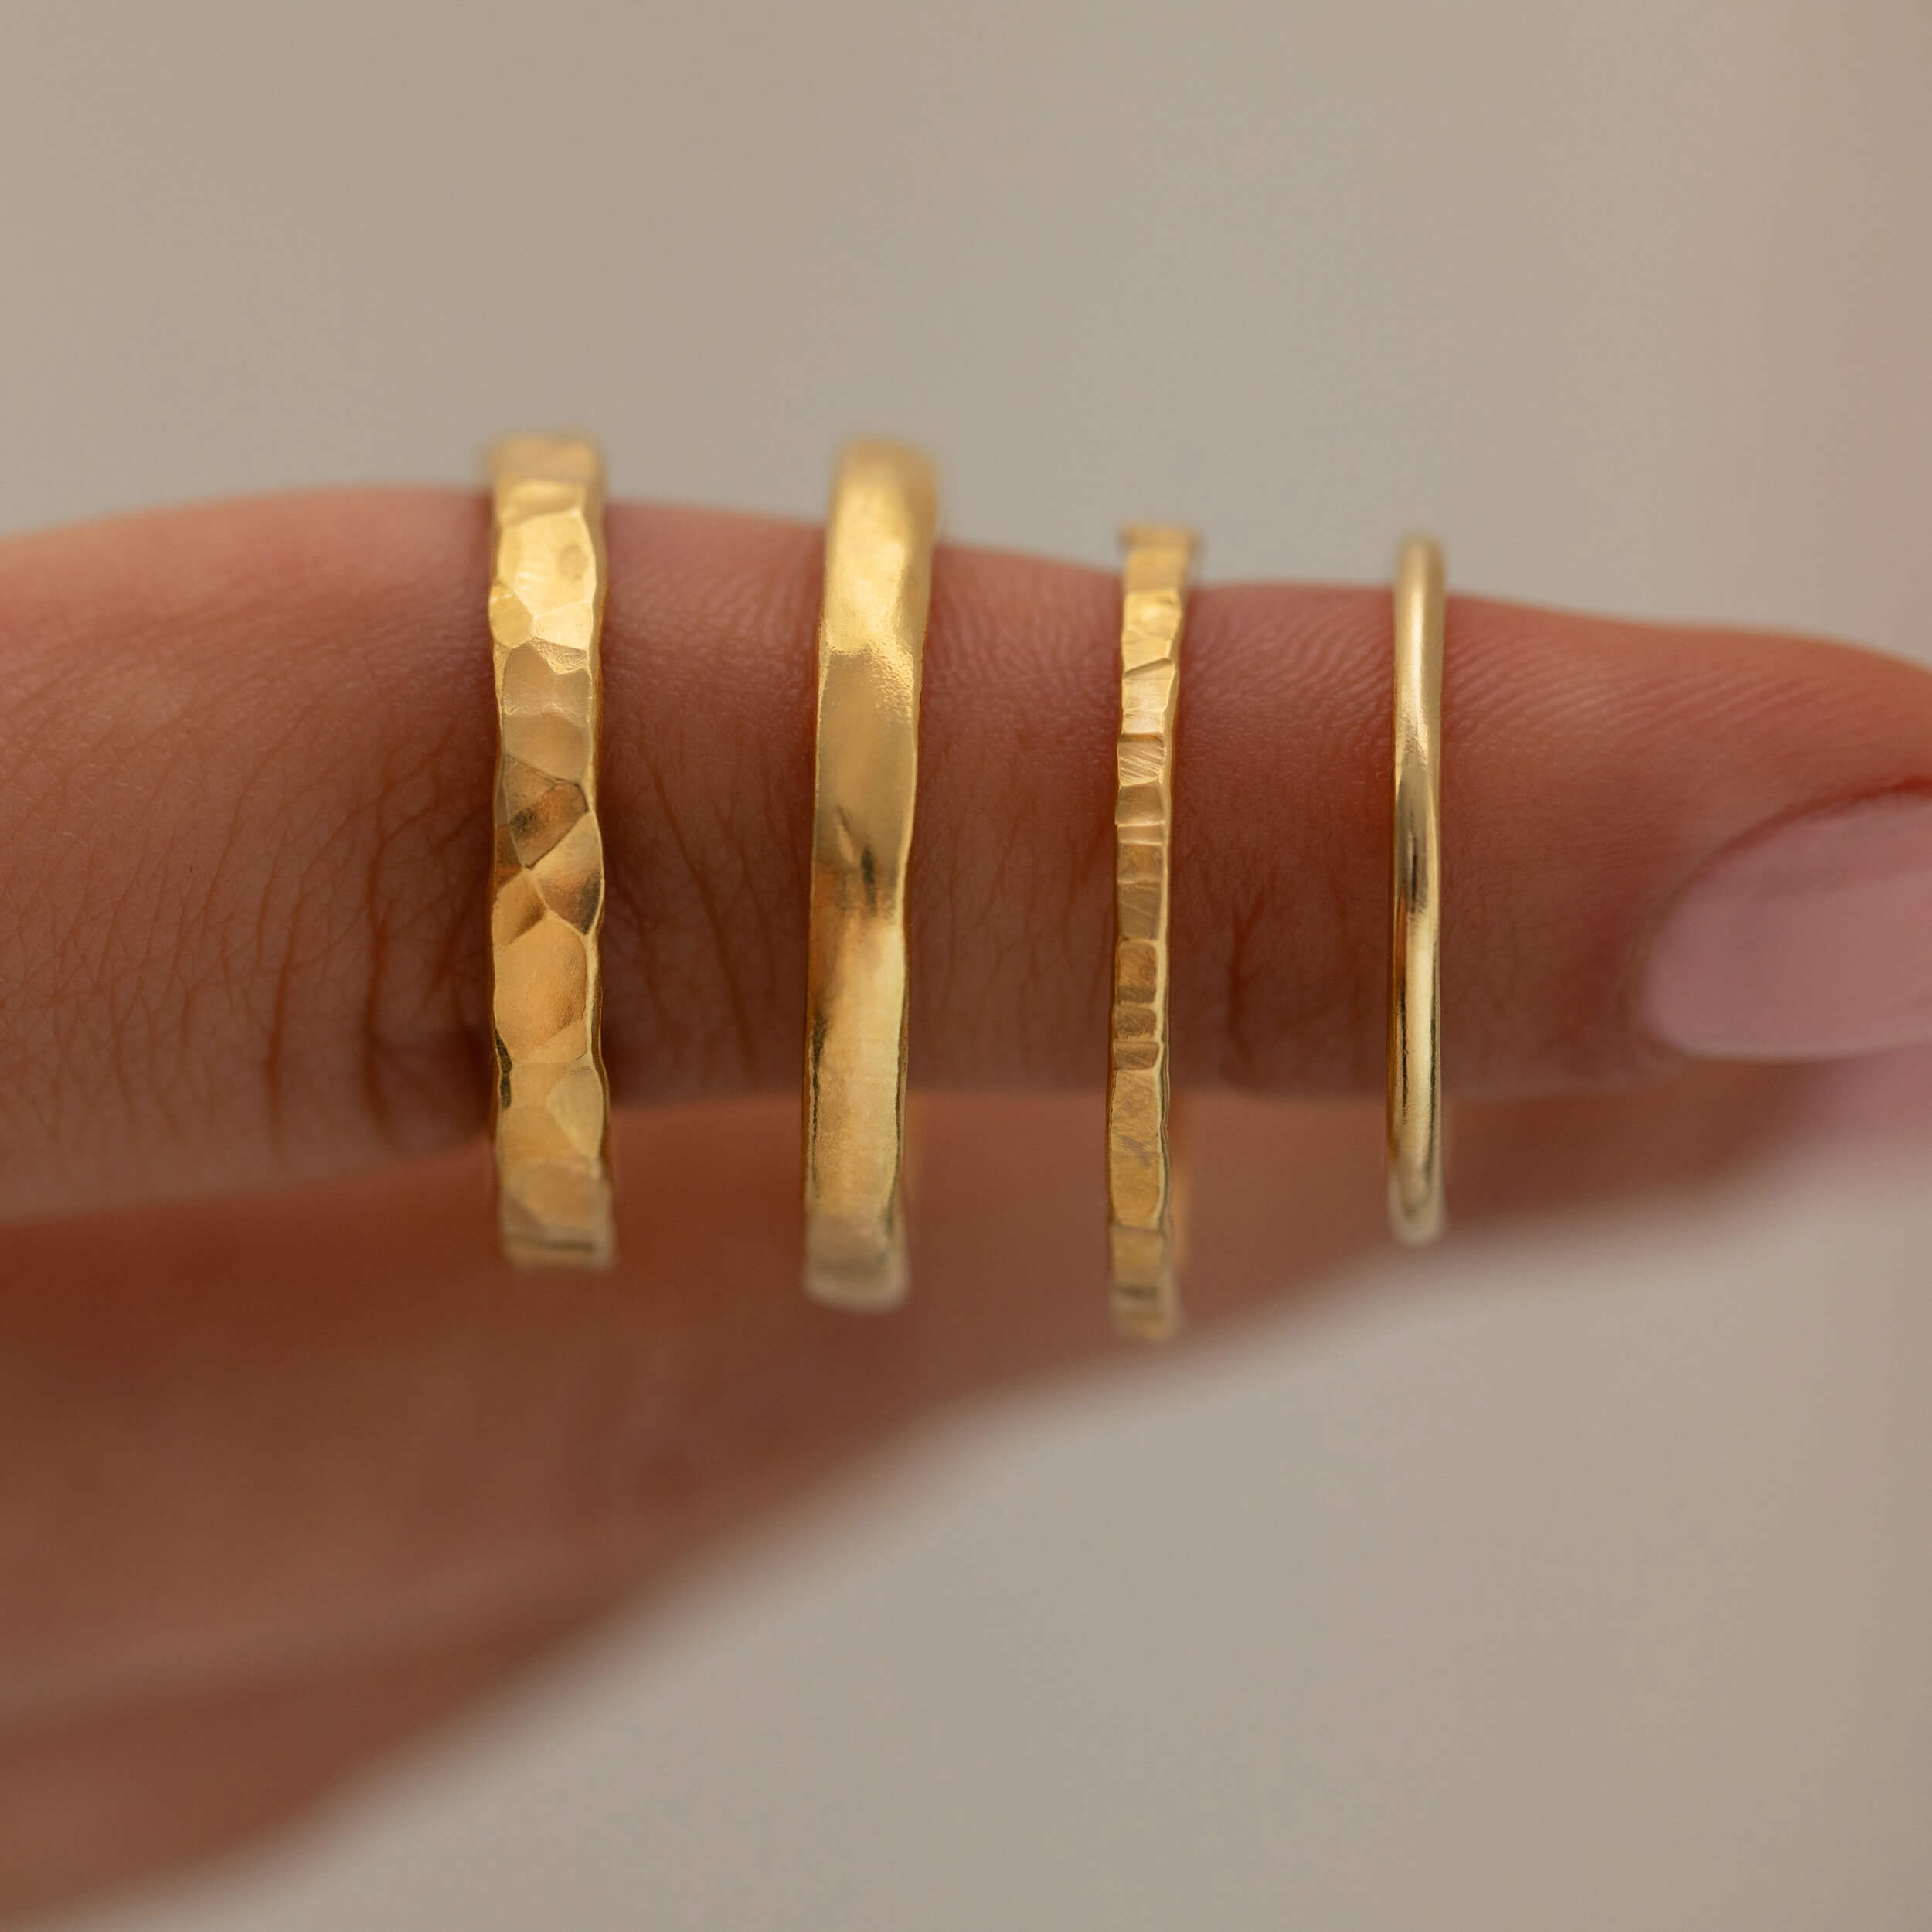 eleanor jewellery design, hammered gold rings, 18 carat gold rings